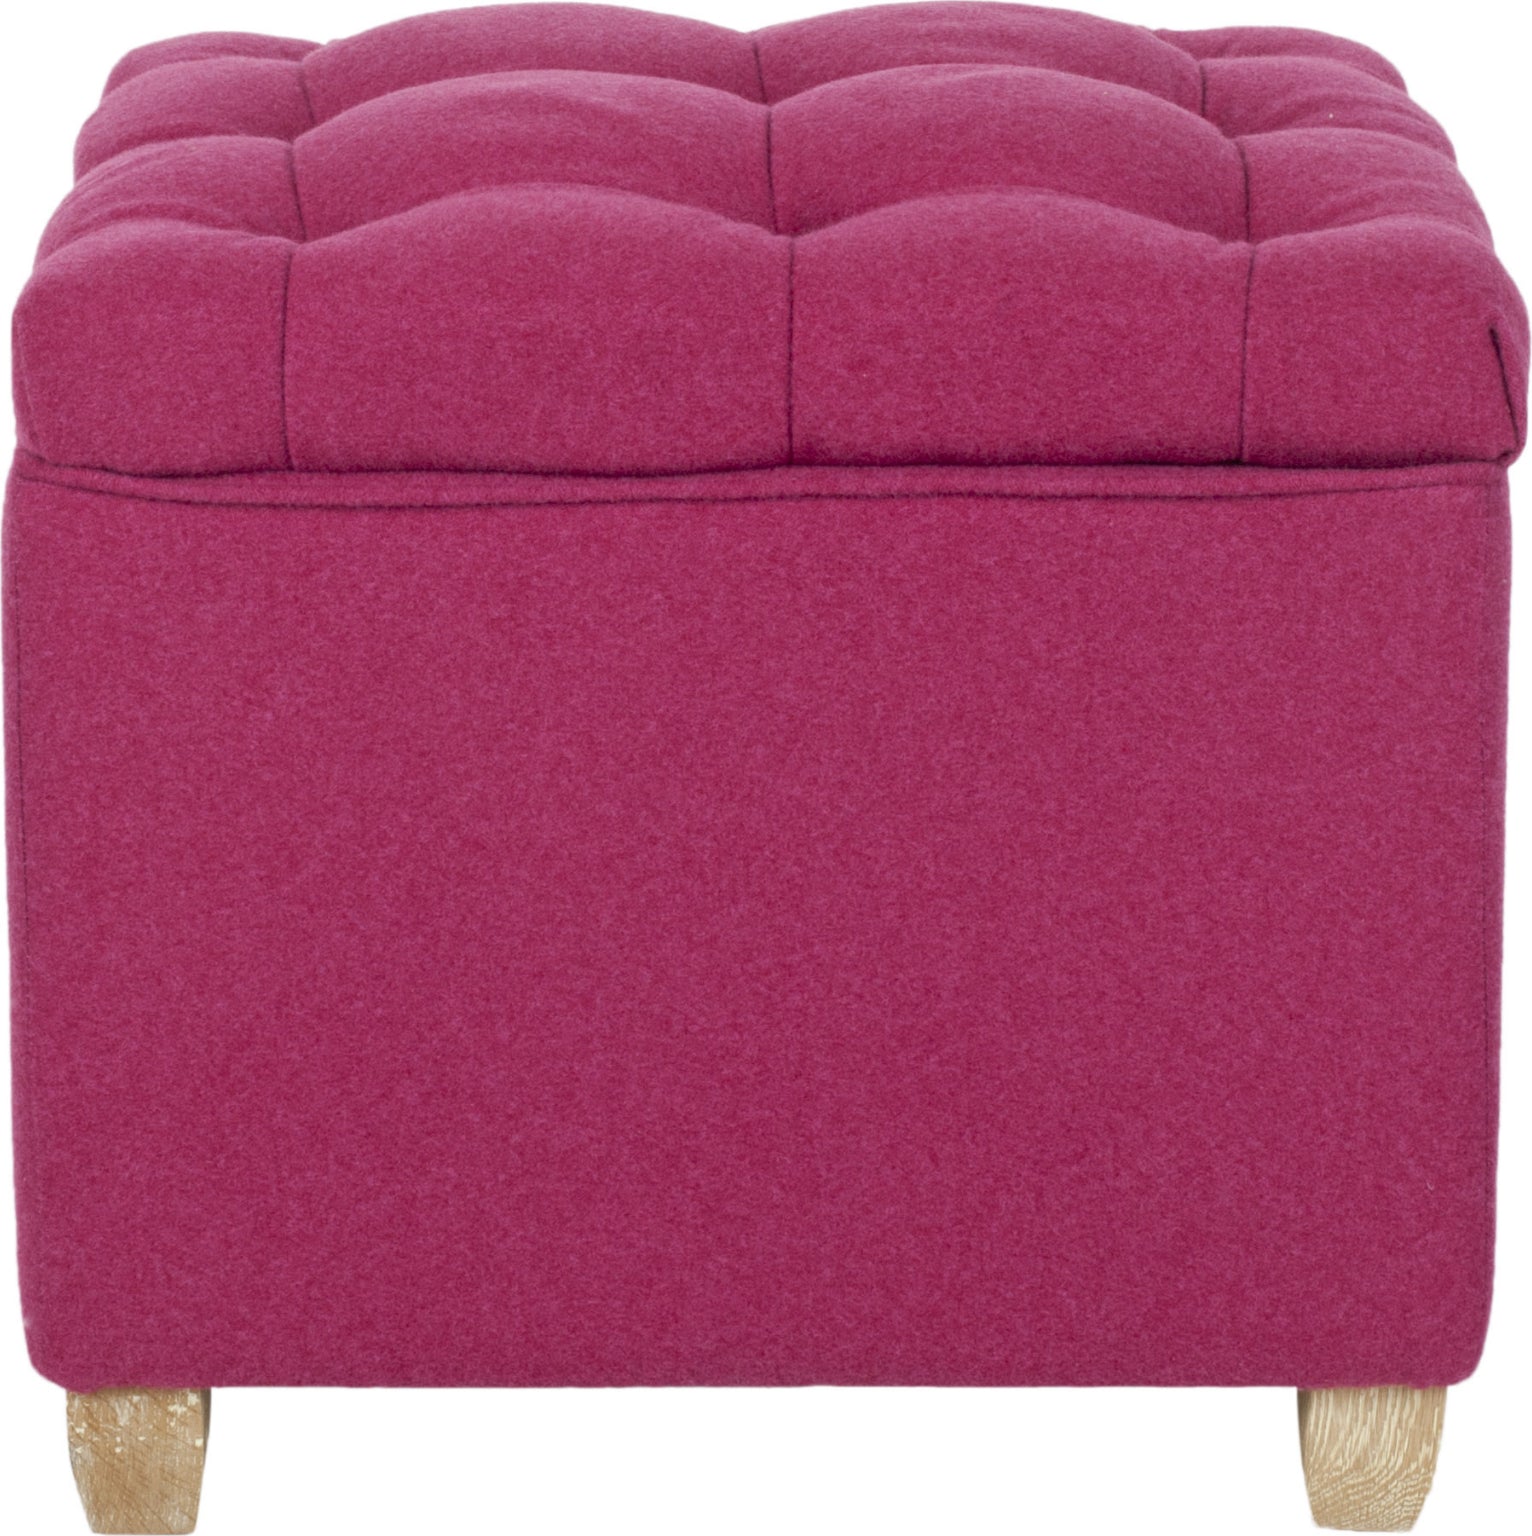 Safavieh Joanie Tufted Ottoman Berry and Pickled Oak Furniture main image